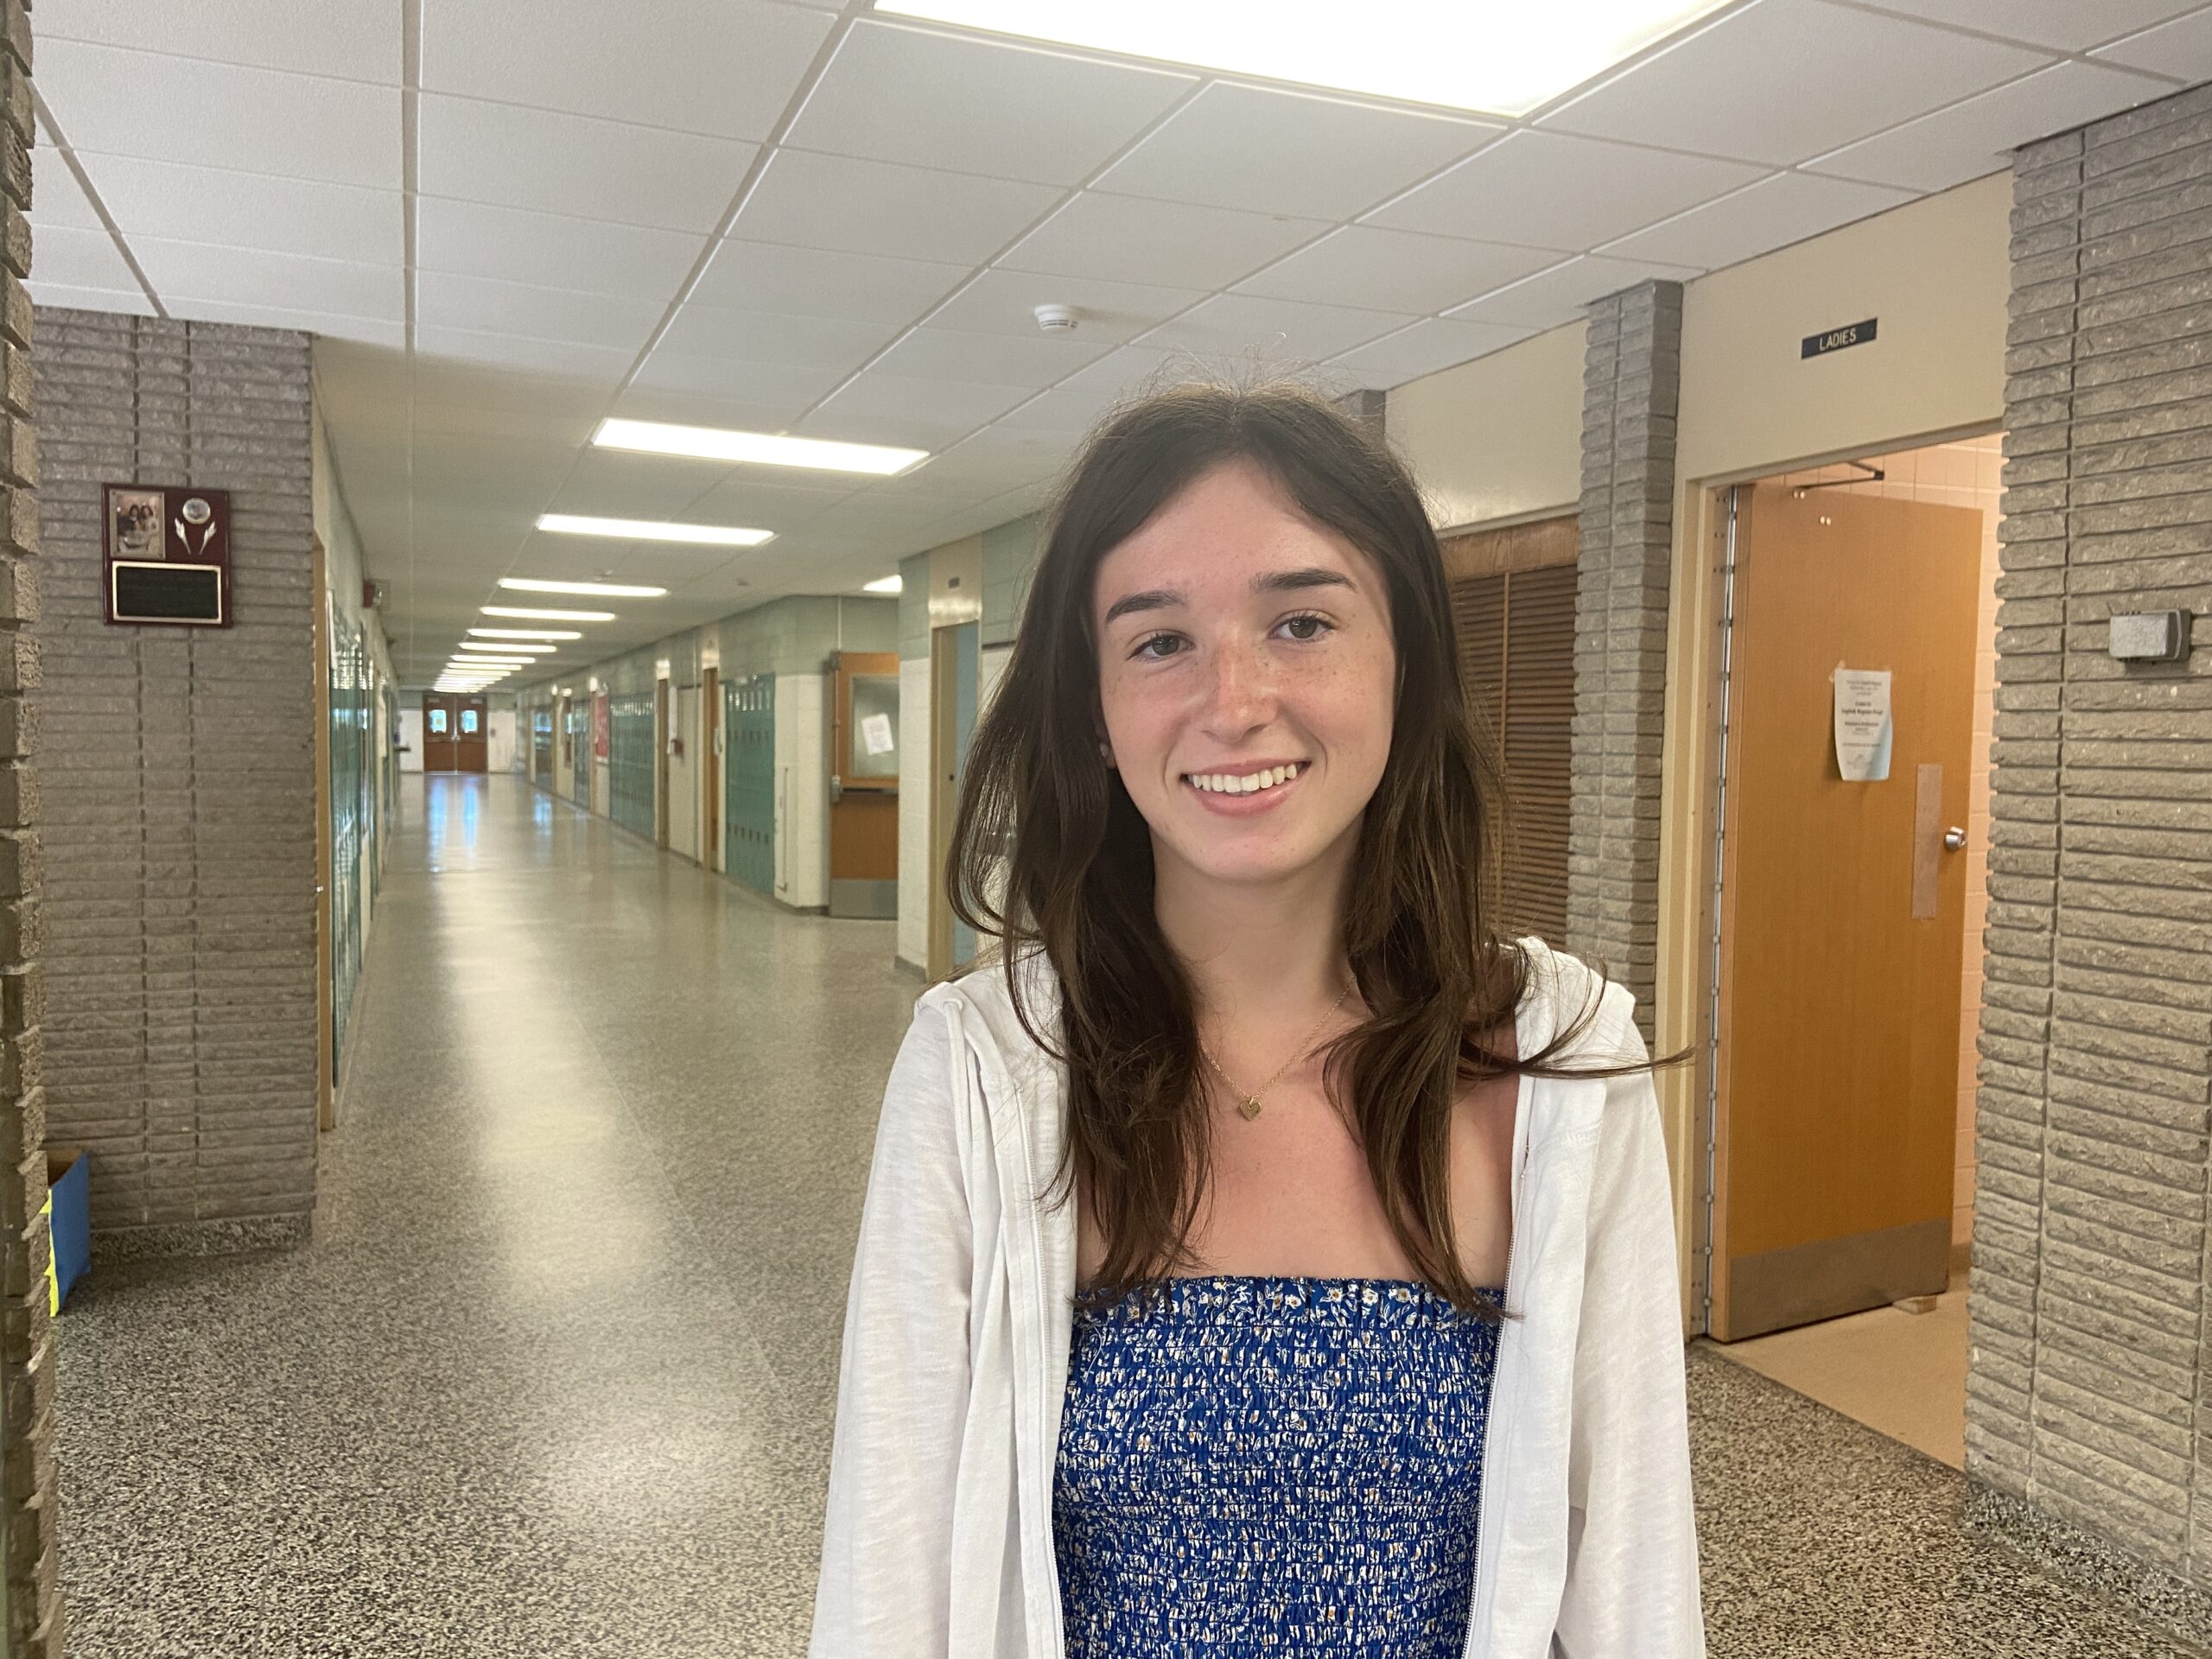 BY JULIA HEMING Abby Edwards, senior at Westhampton Beach High School, raised over $9,000 for autism awareness this school year.